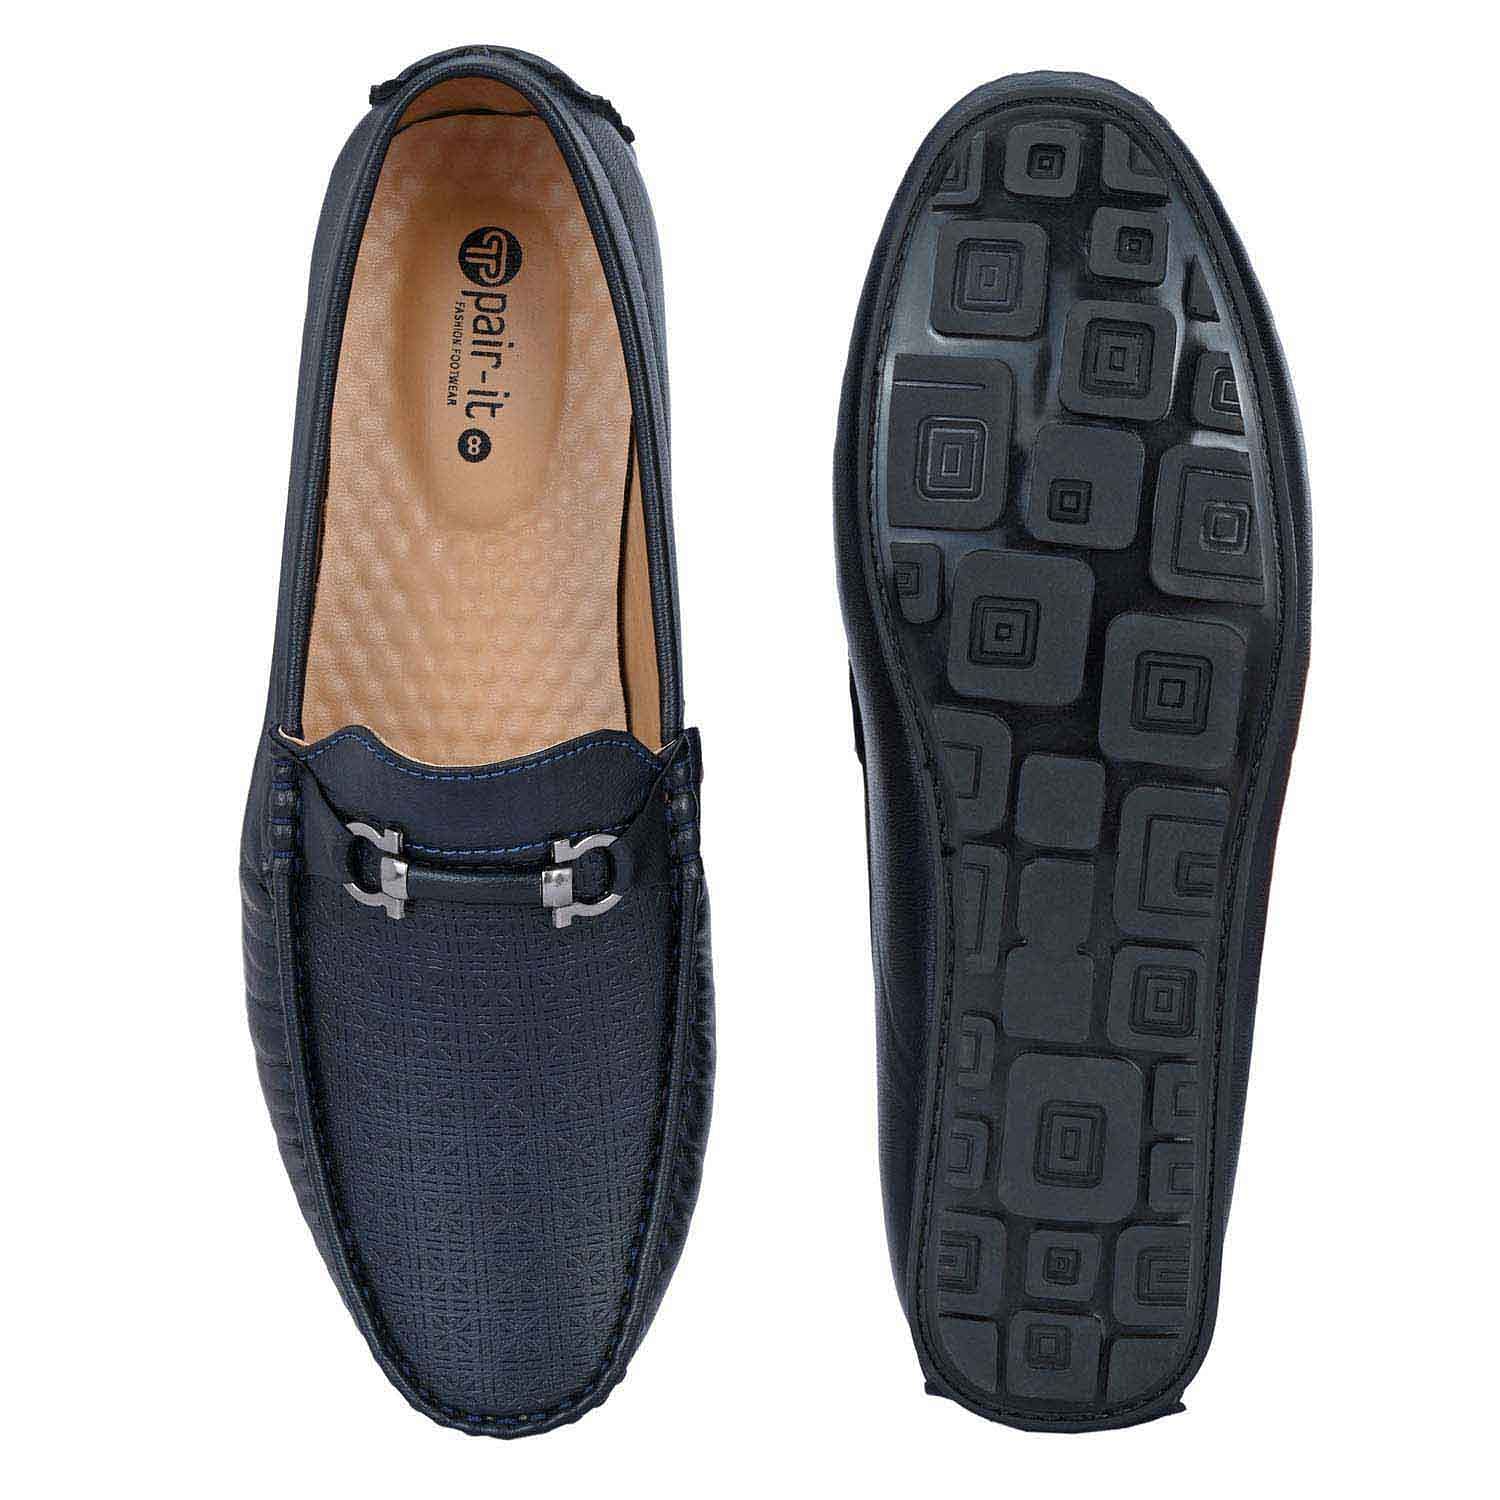 Pair-it Men's Loafers Shoes - Blue-LZ-Loafer105